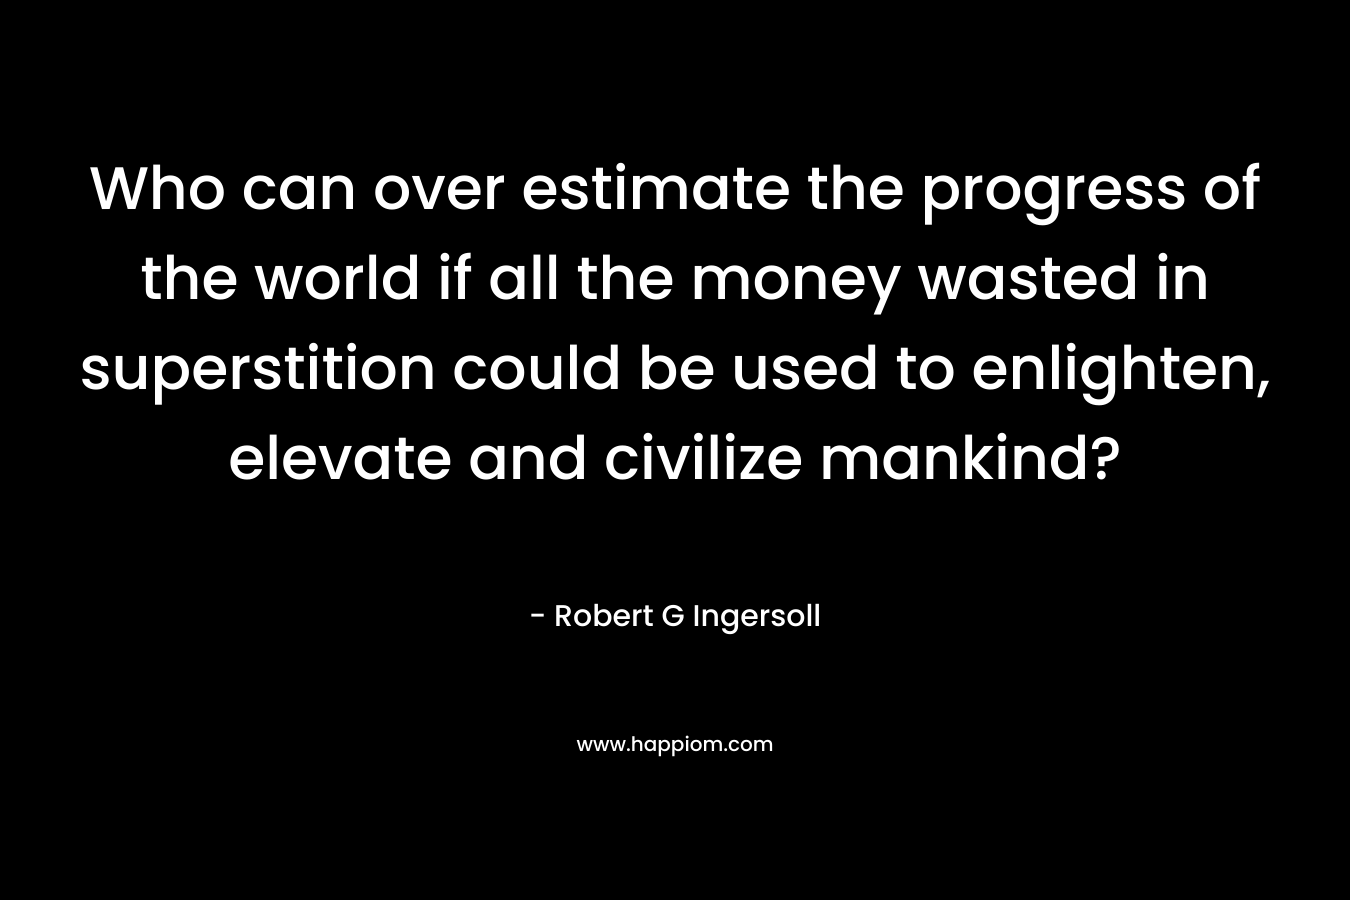 Who can over estimate the progress of the world if all the money wasted in superstition could be used to enlighten, elevate and civilize mankind? – Robert G Ingersoll